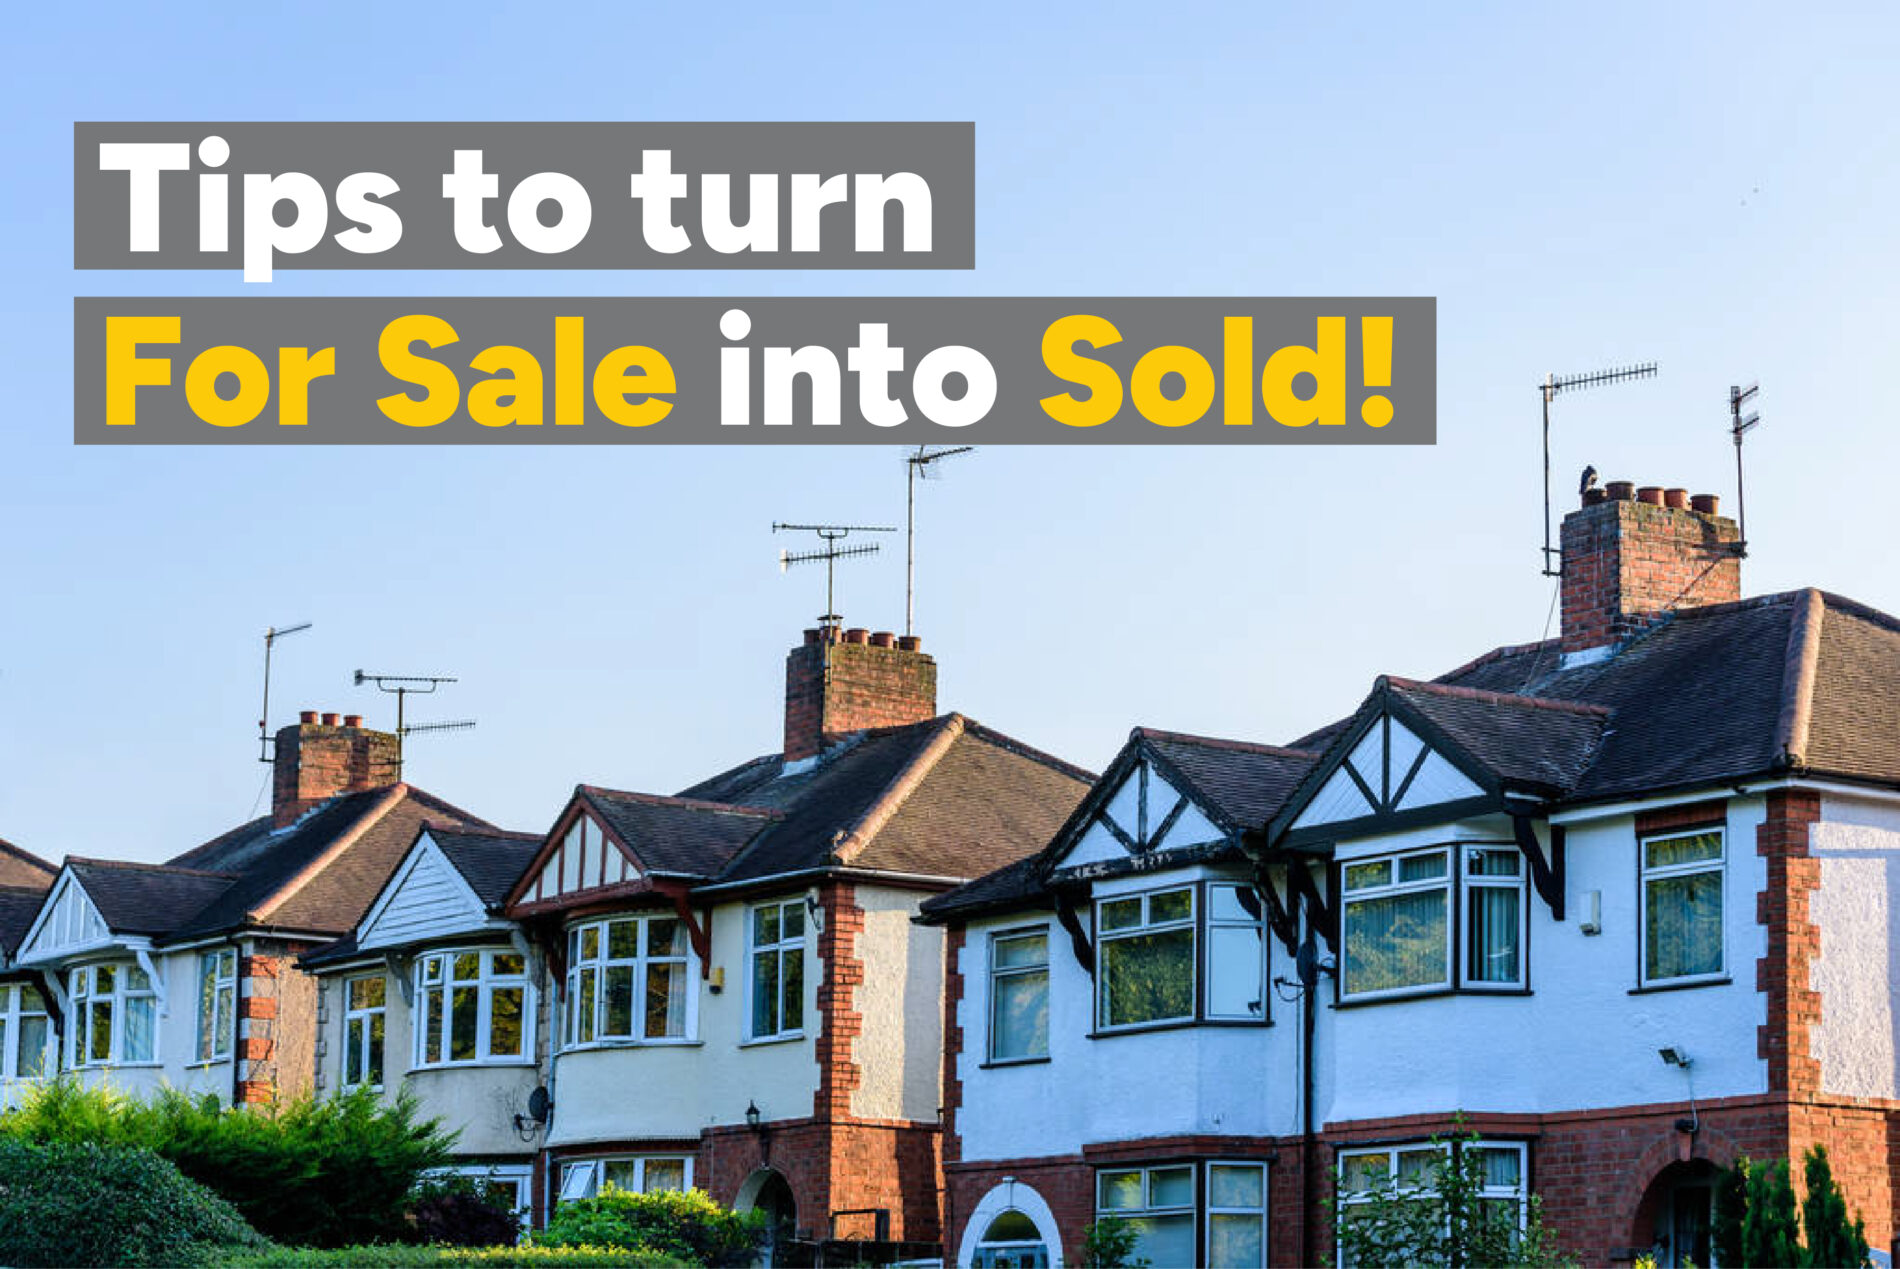 Tips to turn For Sale into Sold!